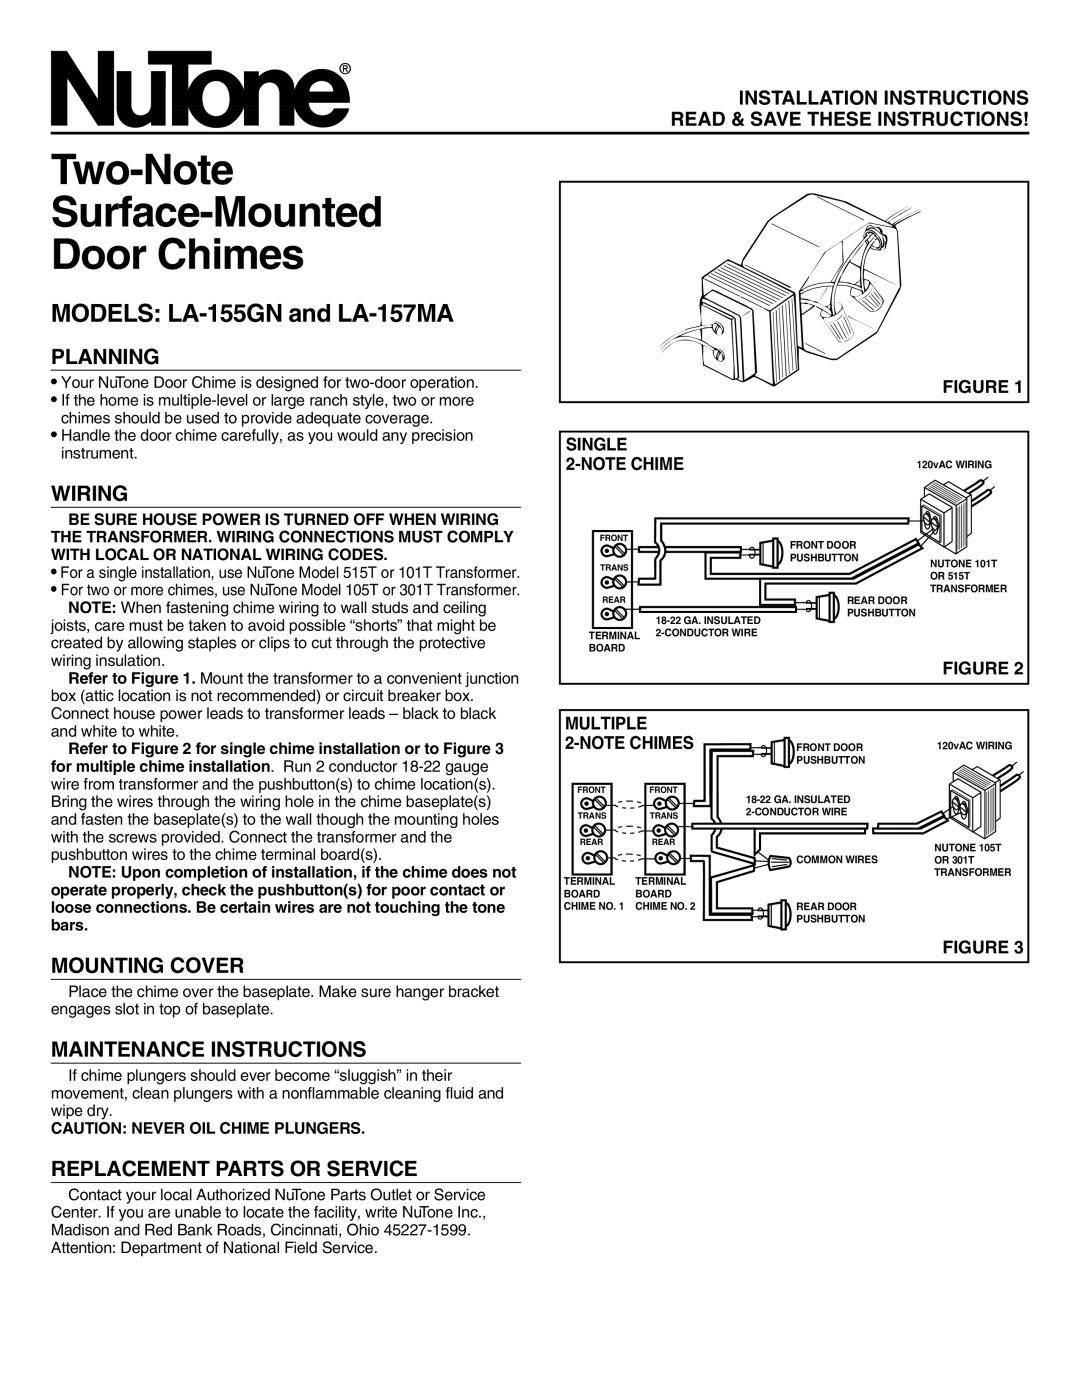 NuTone installation instructions MODELS LA-155GNand LA-157MA, Planning, Wiring, Mounting Cover, Single, Notechime 